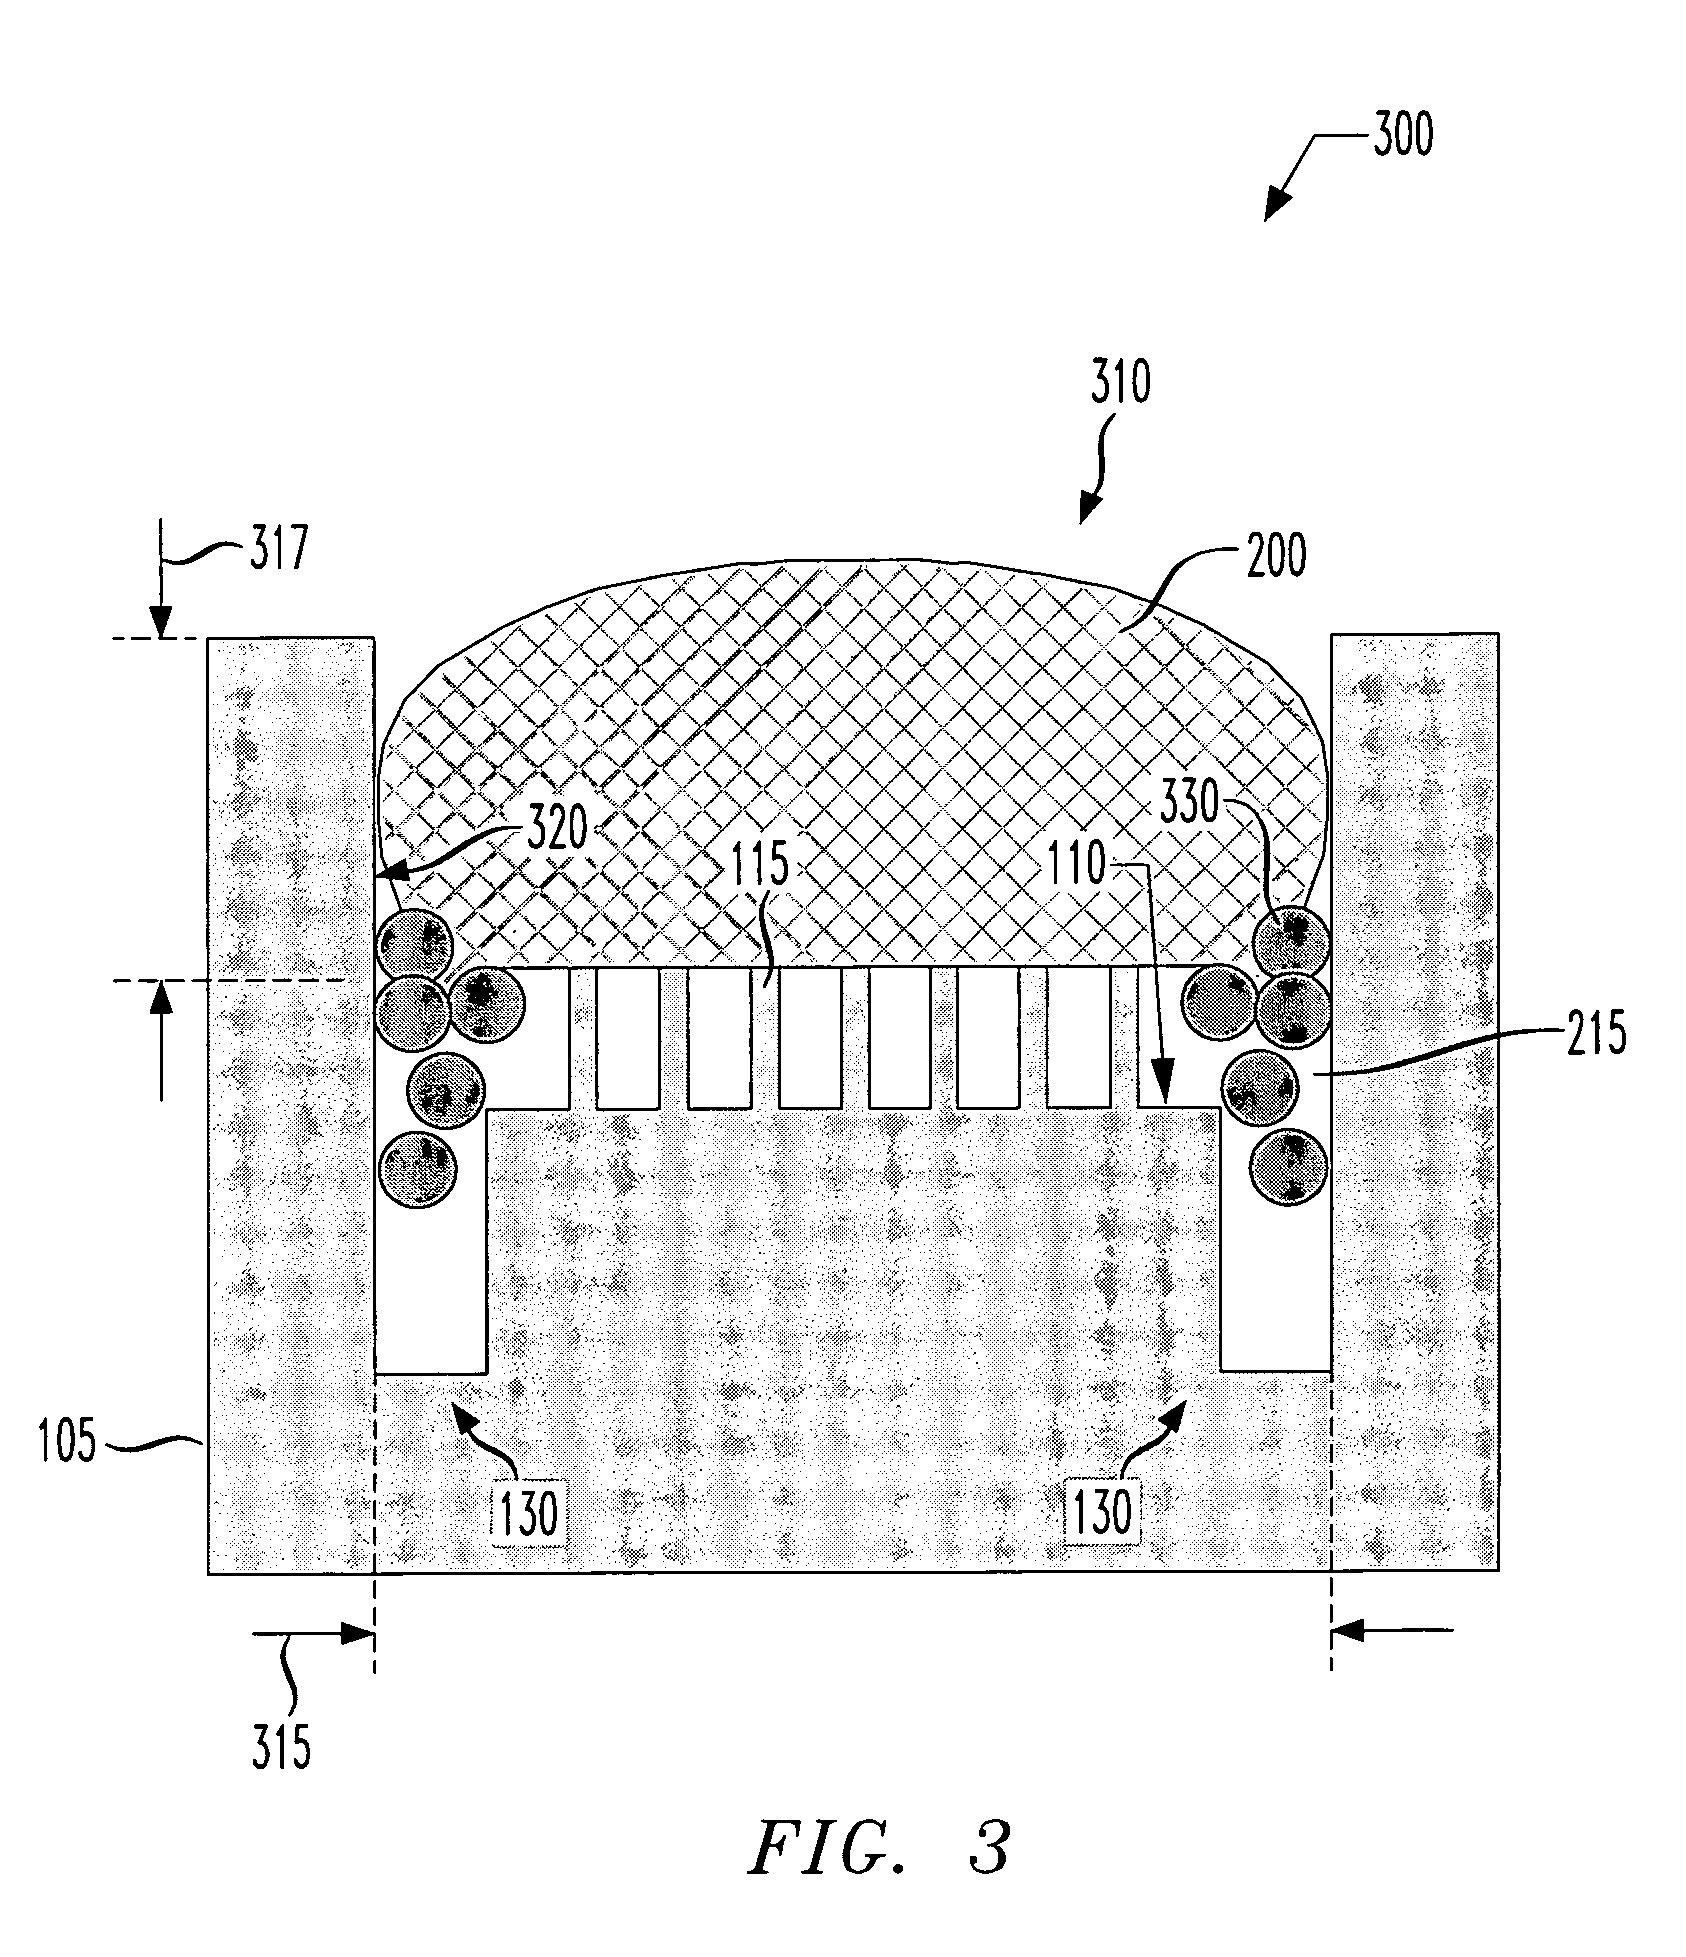 Structured surfaces with controlled flow resistance